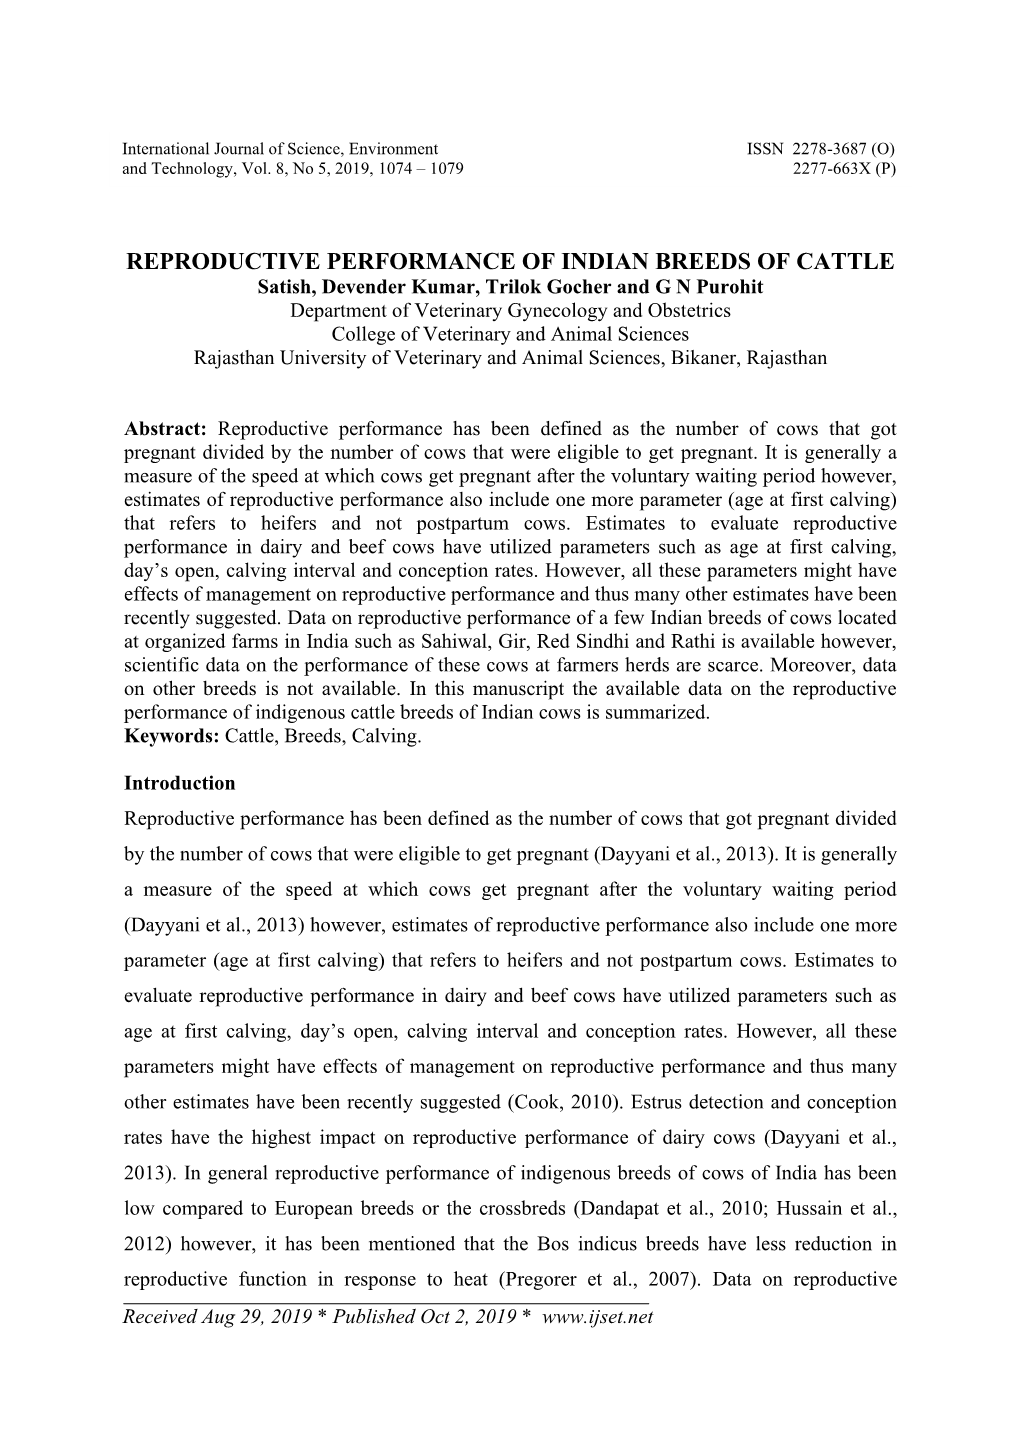 Reproductive Performance of Indian Breeds of Cattle